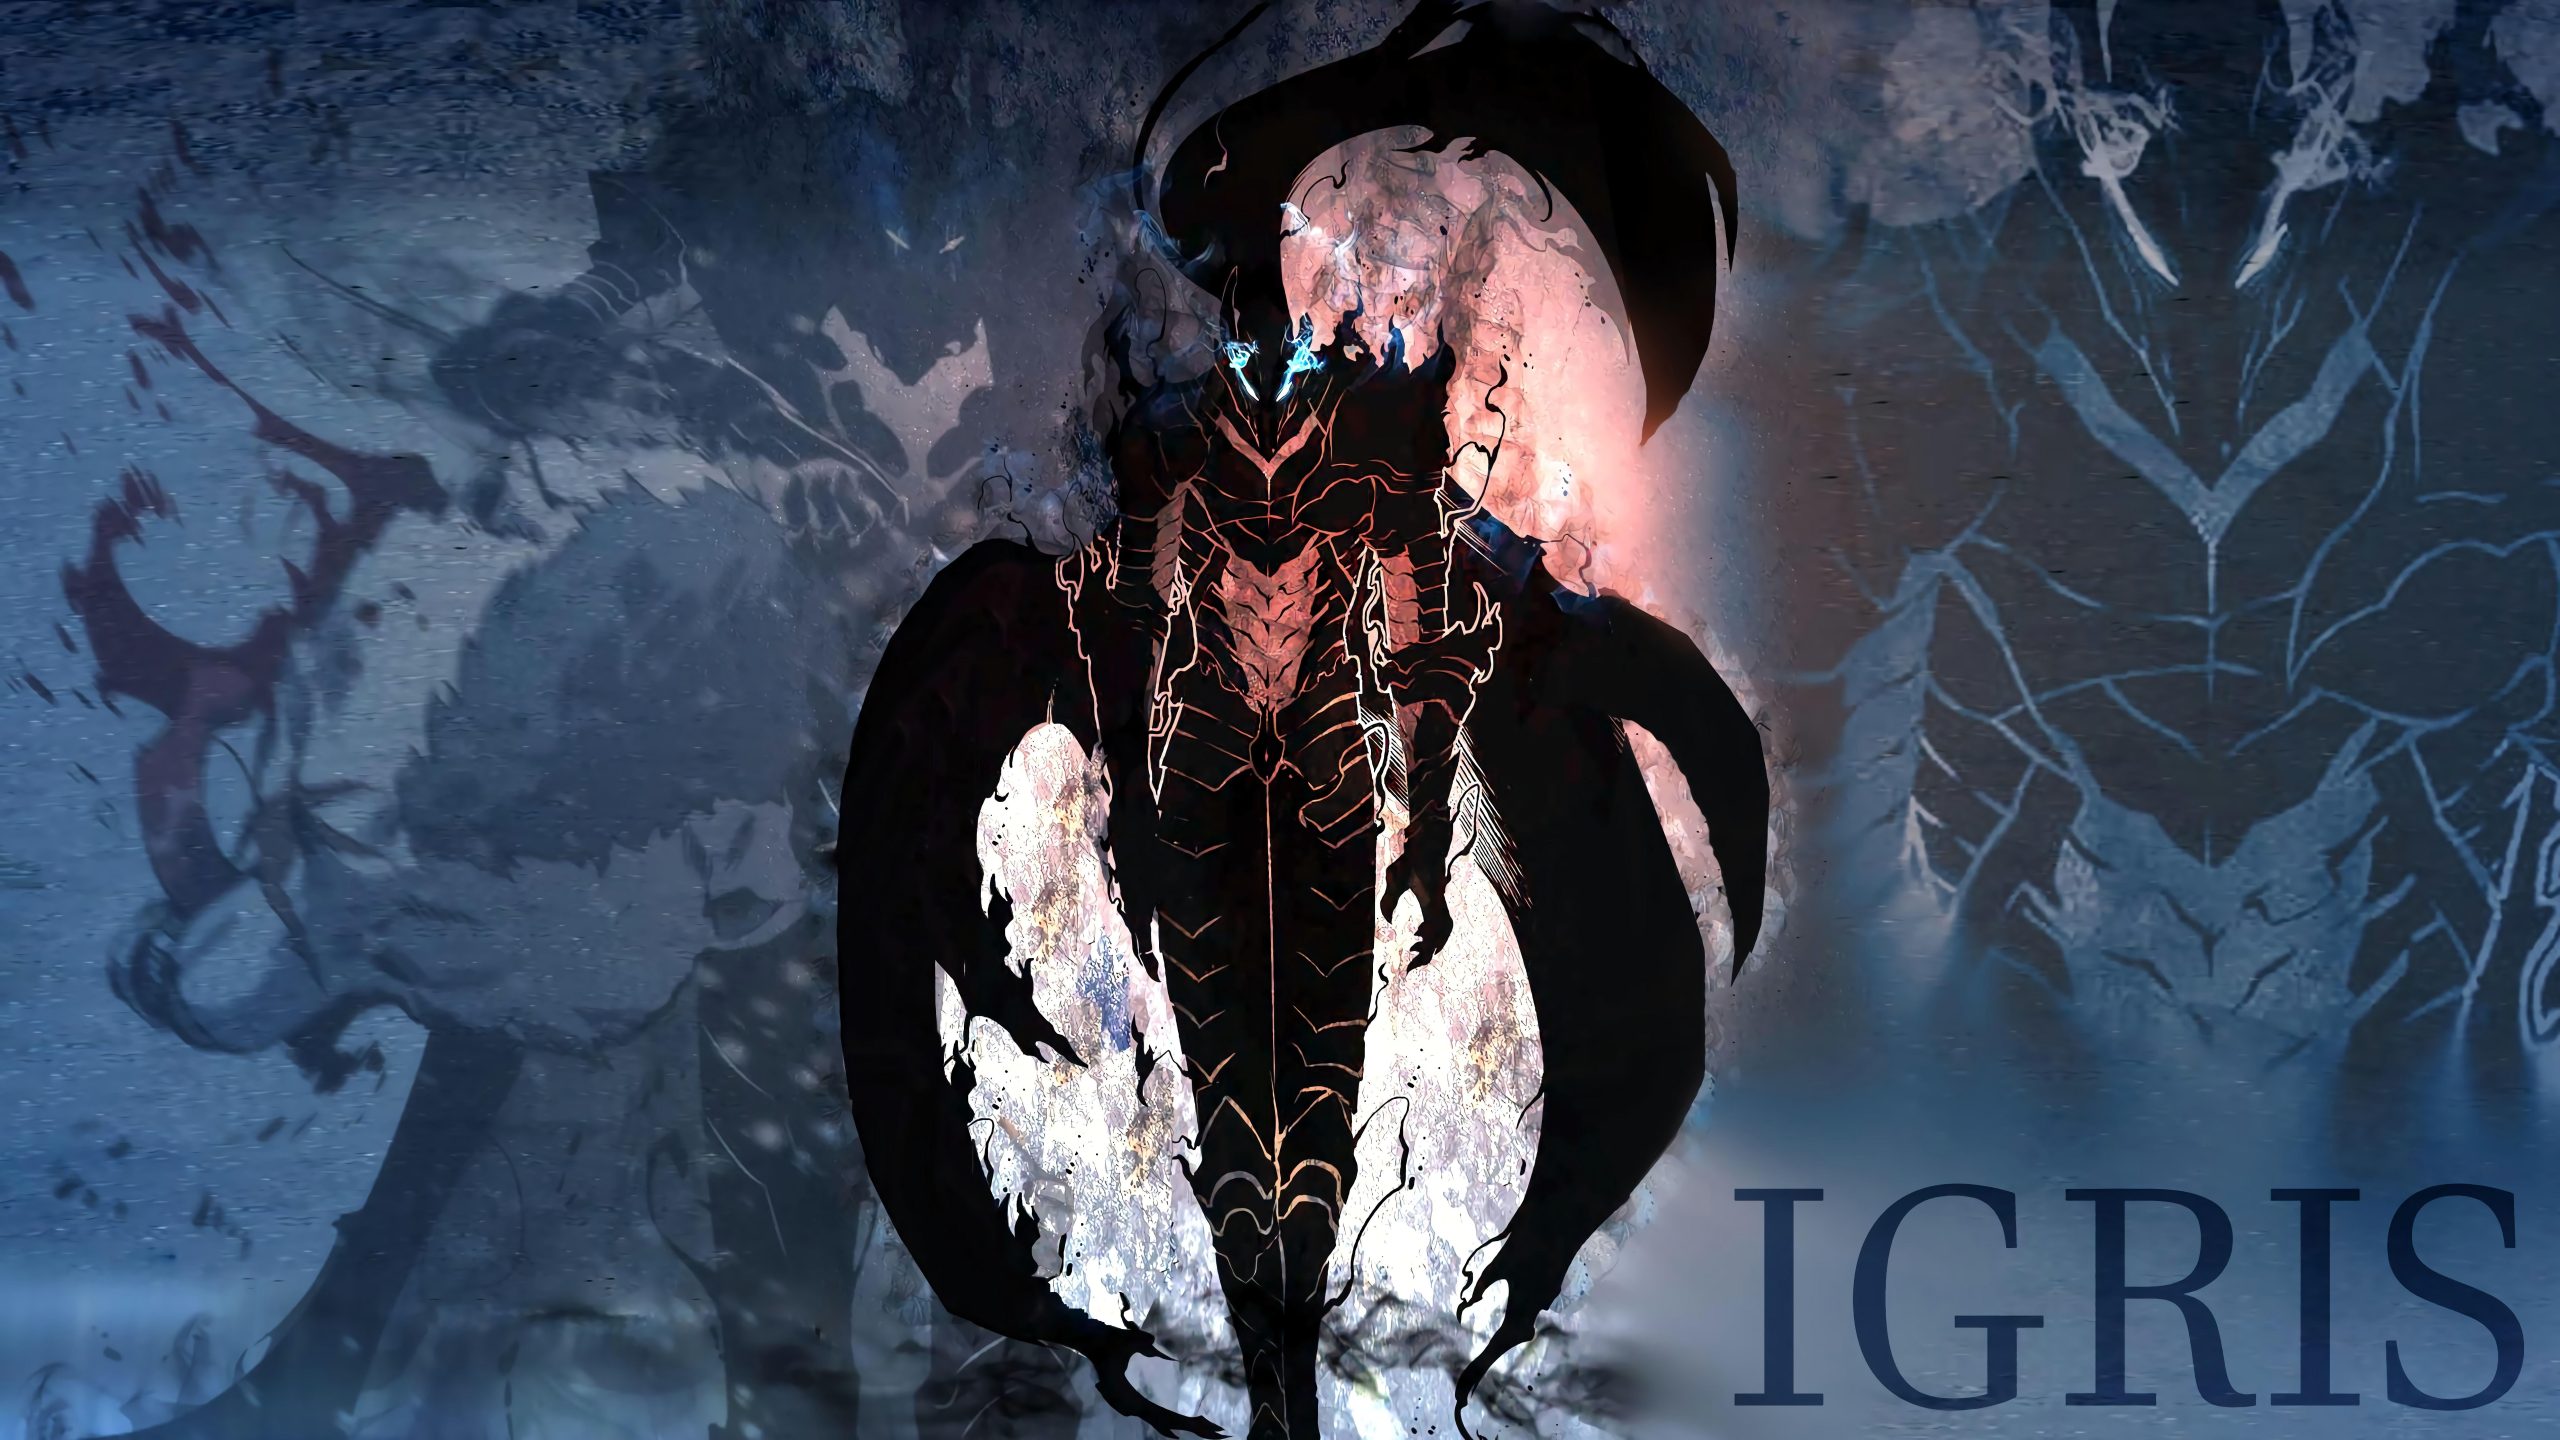 Solo Leveling Igris cool wallpaper, Solo Leveling Igris, Game